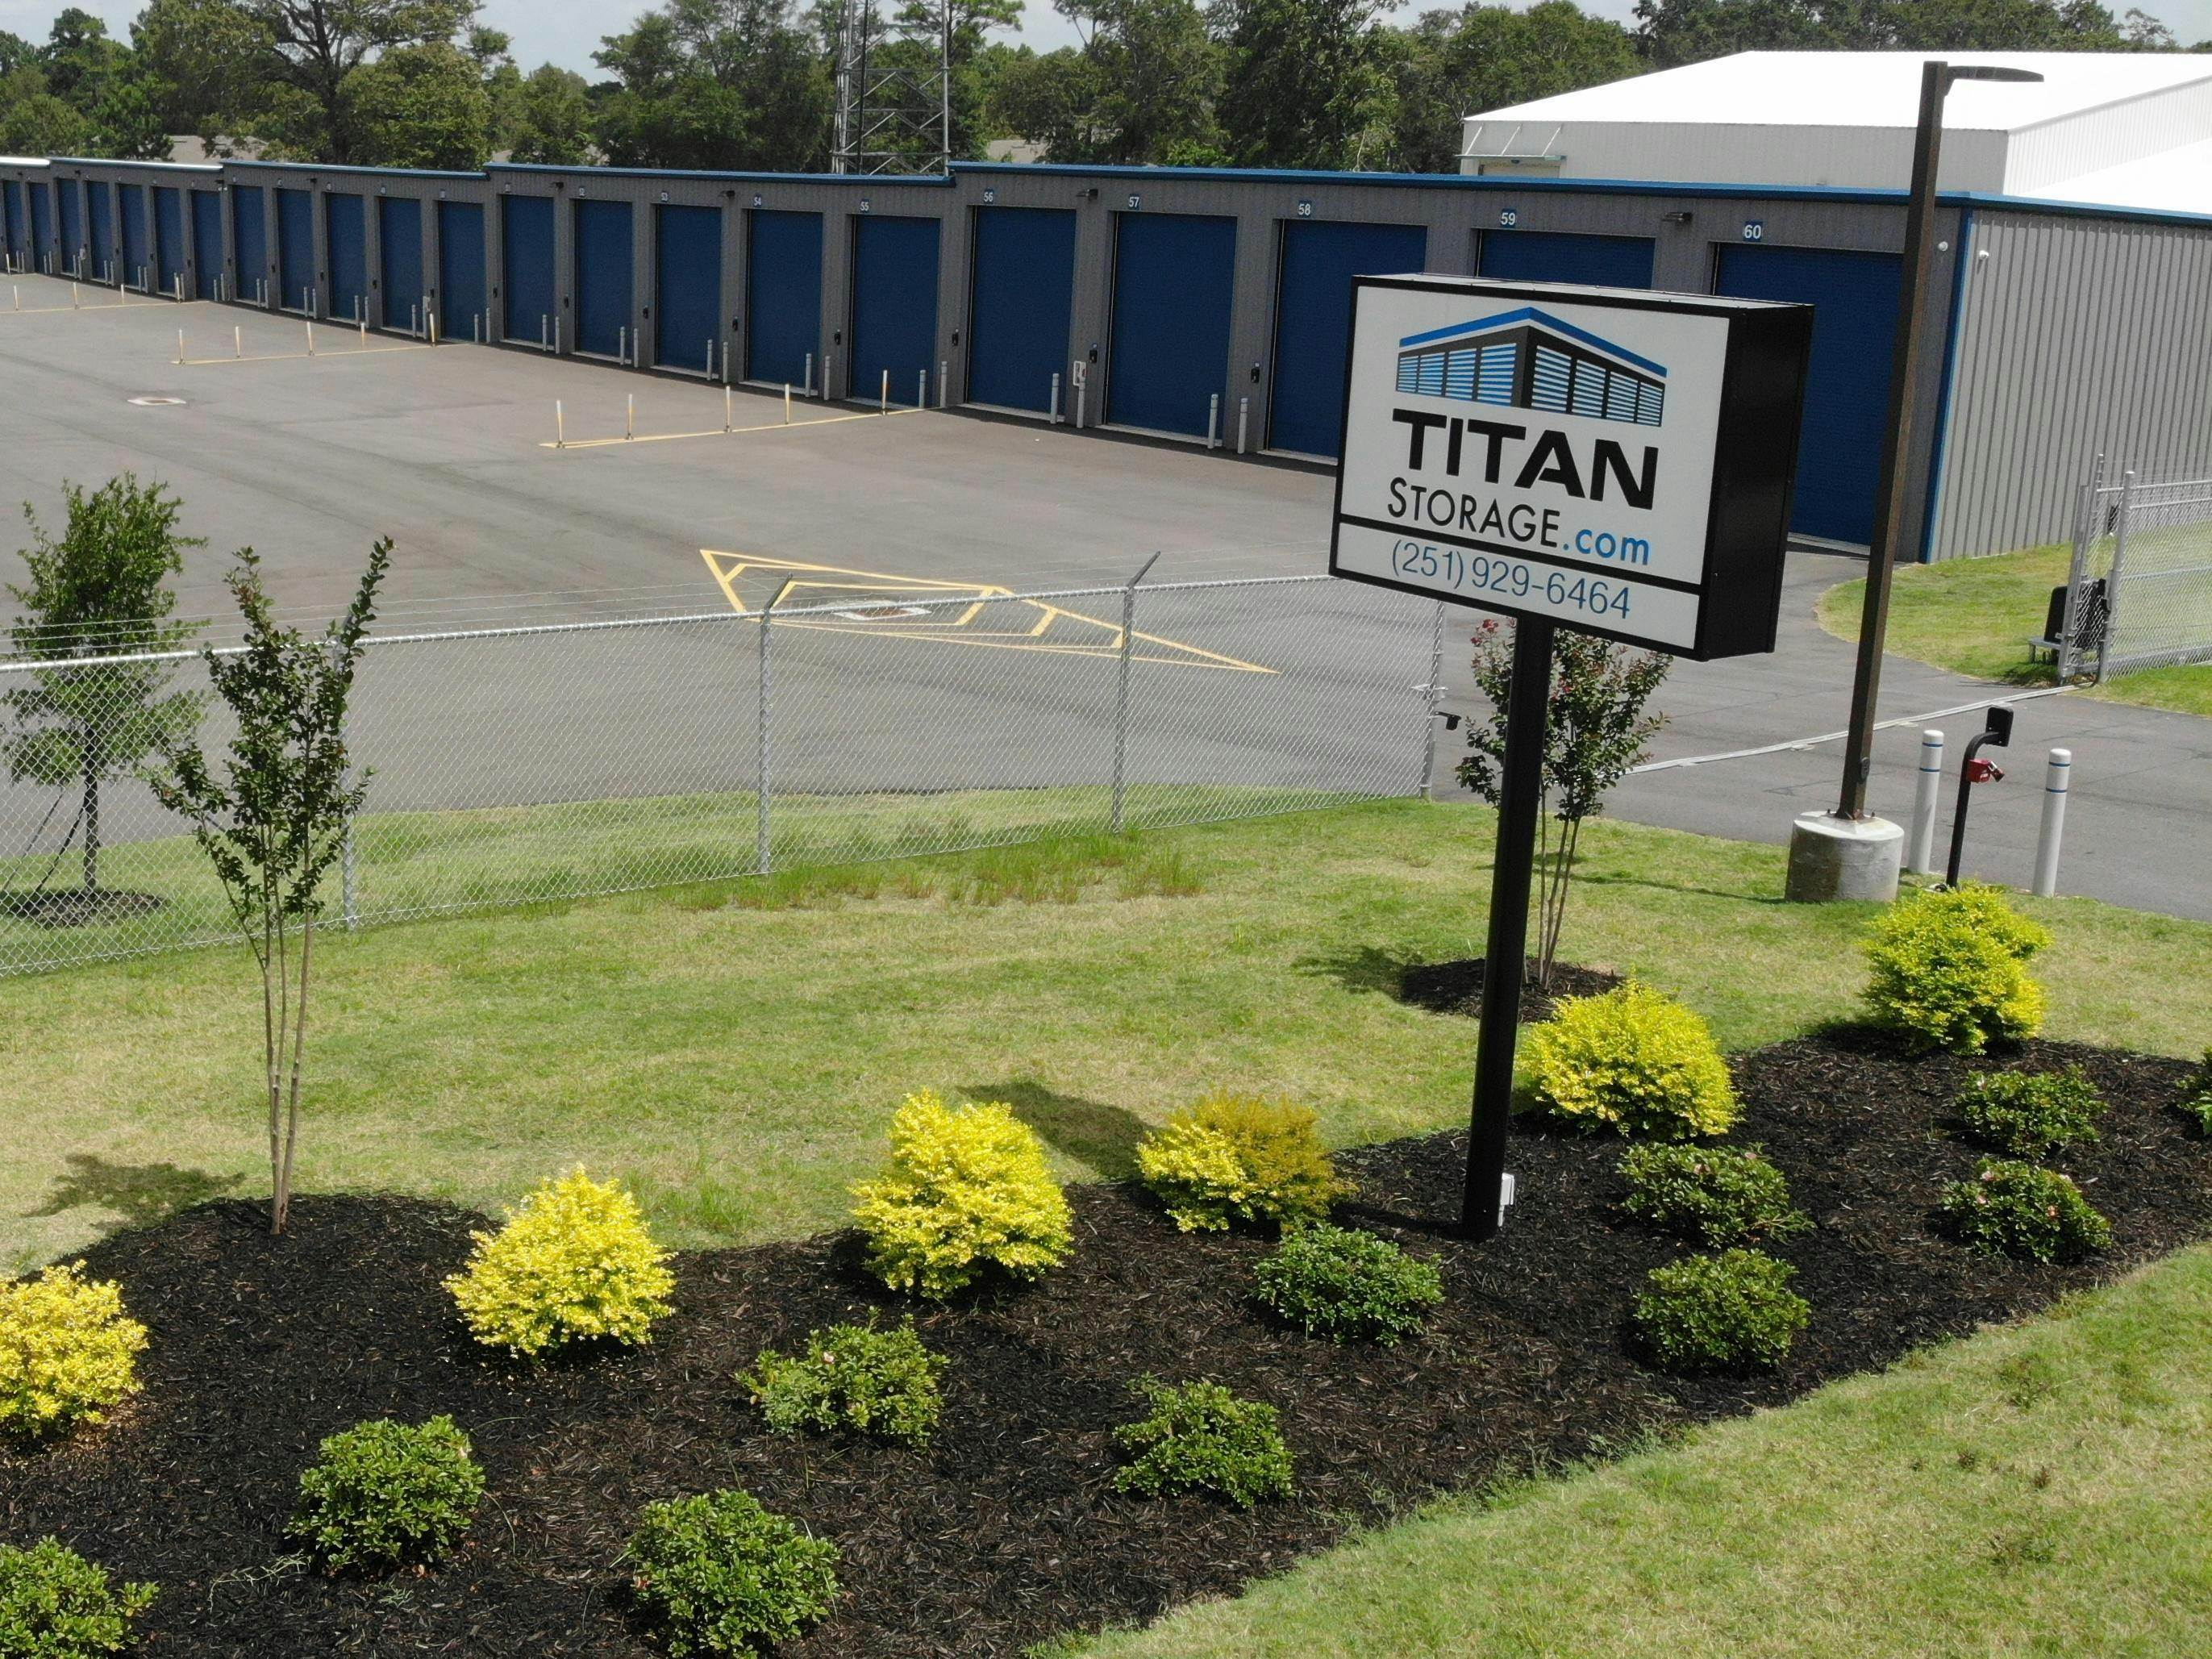 GET IN TOUCH WITH TITAN STORAGE FOR YOUR Fairhope, AL RV STORAGE UNIT SOLUTION